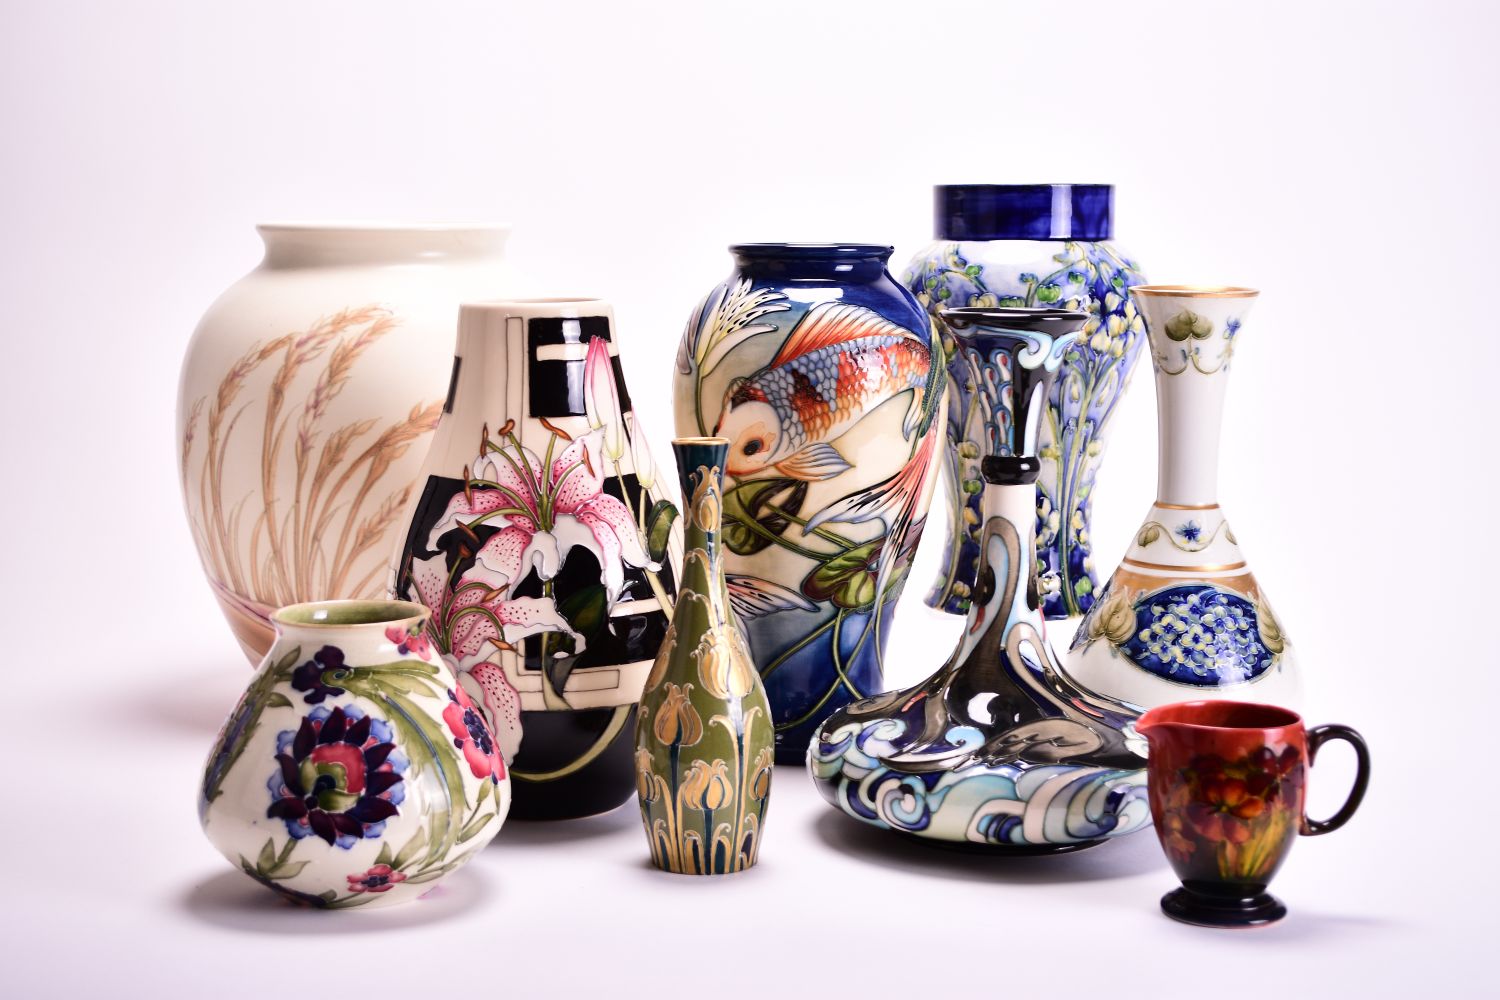 Pictures, Ceramics, Collectables and Modern Design Auction